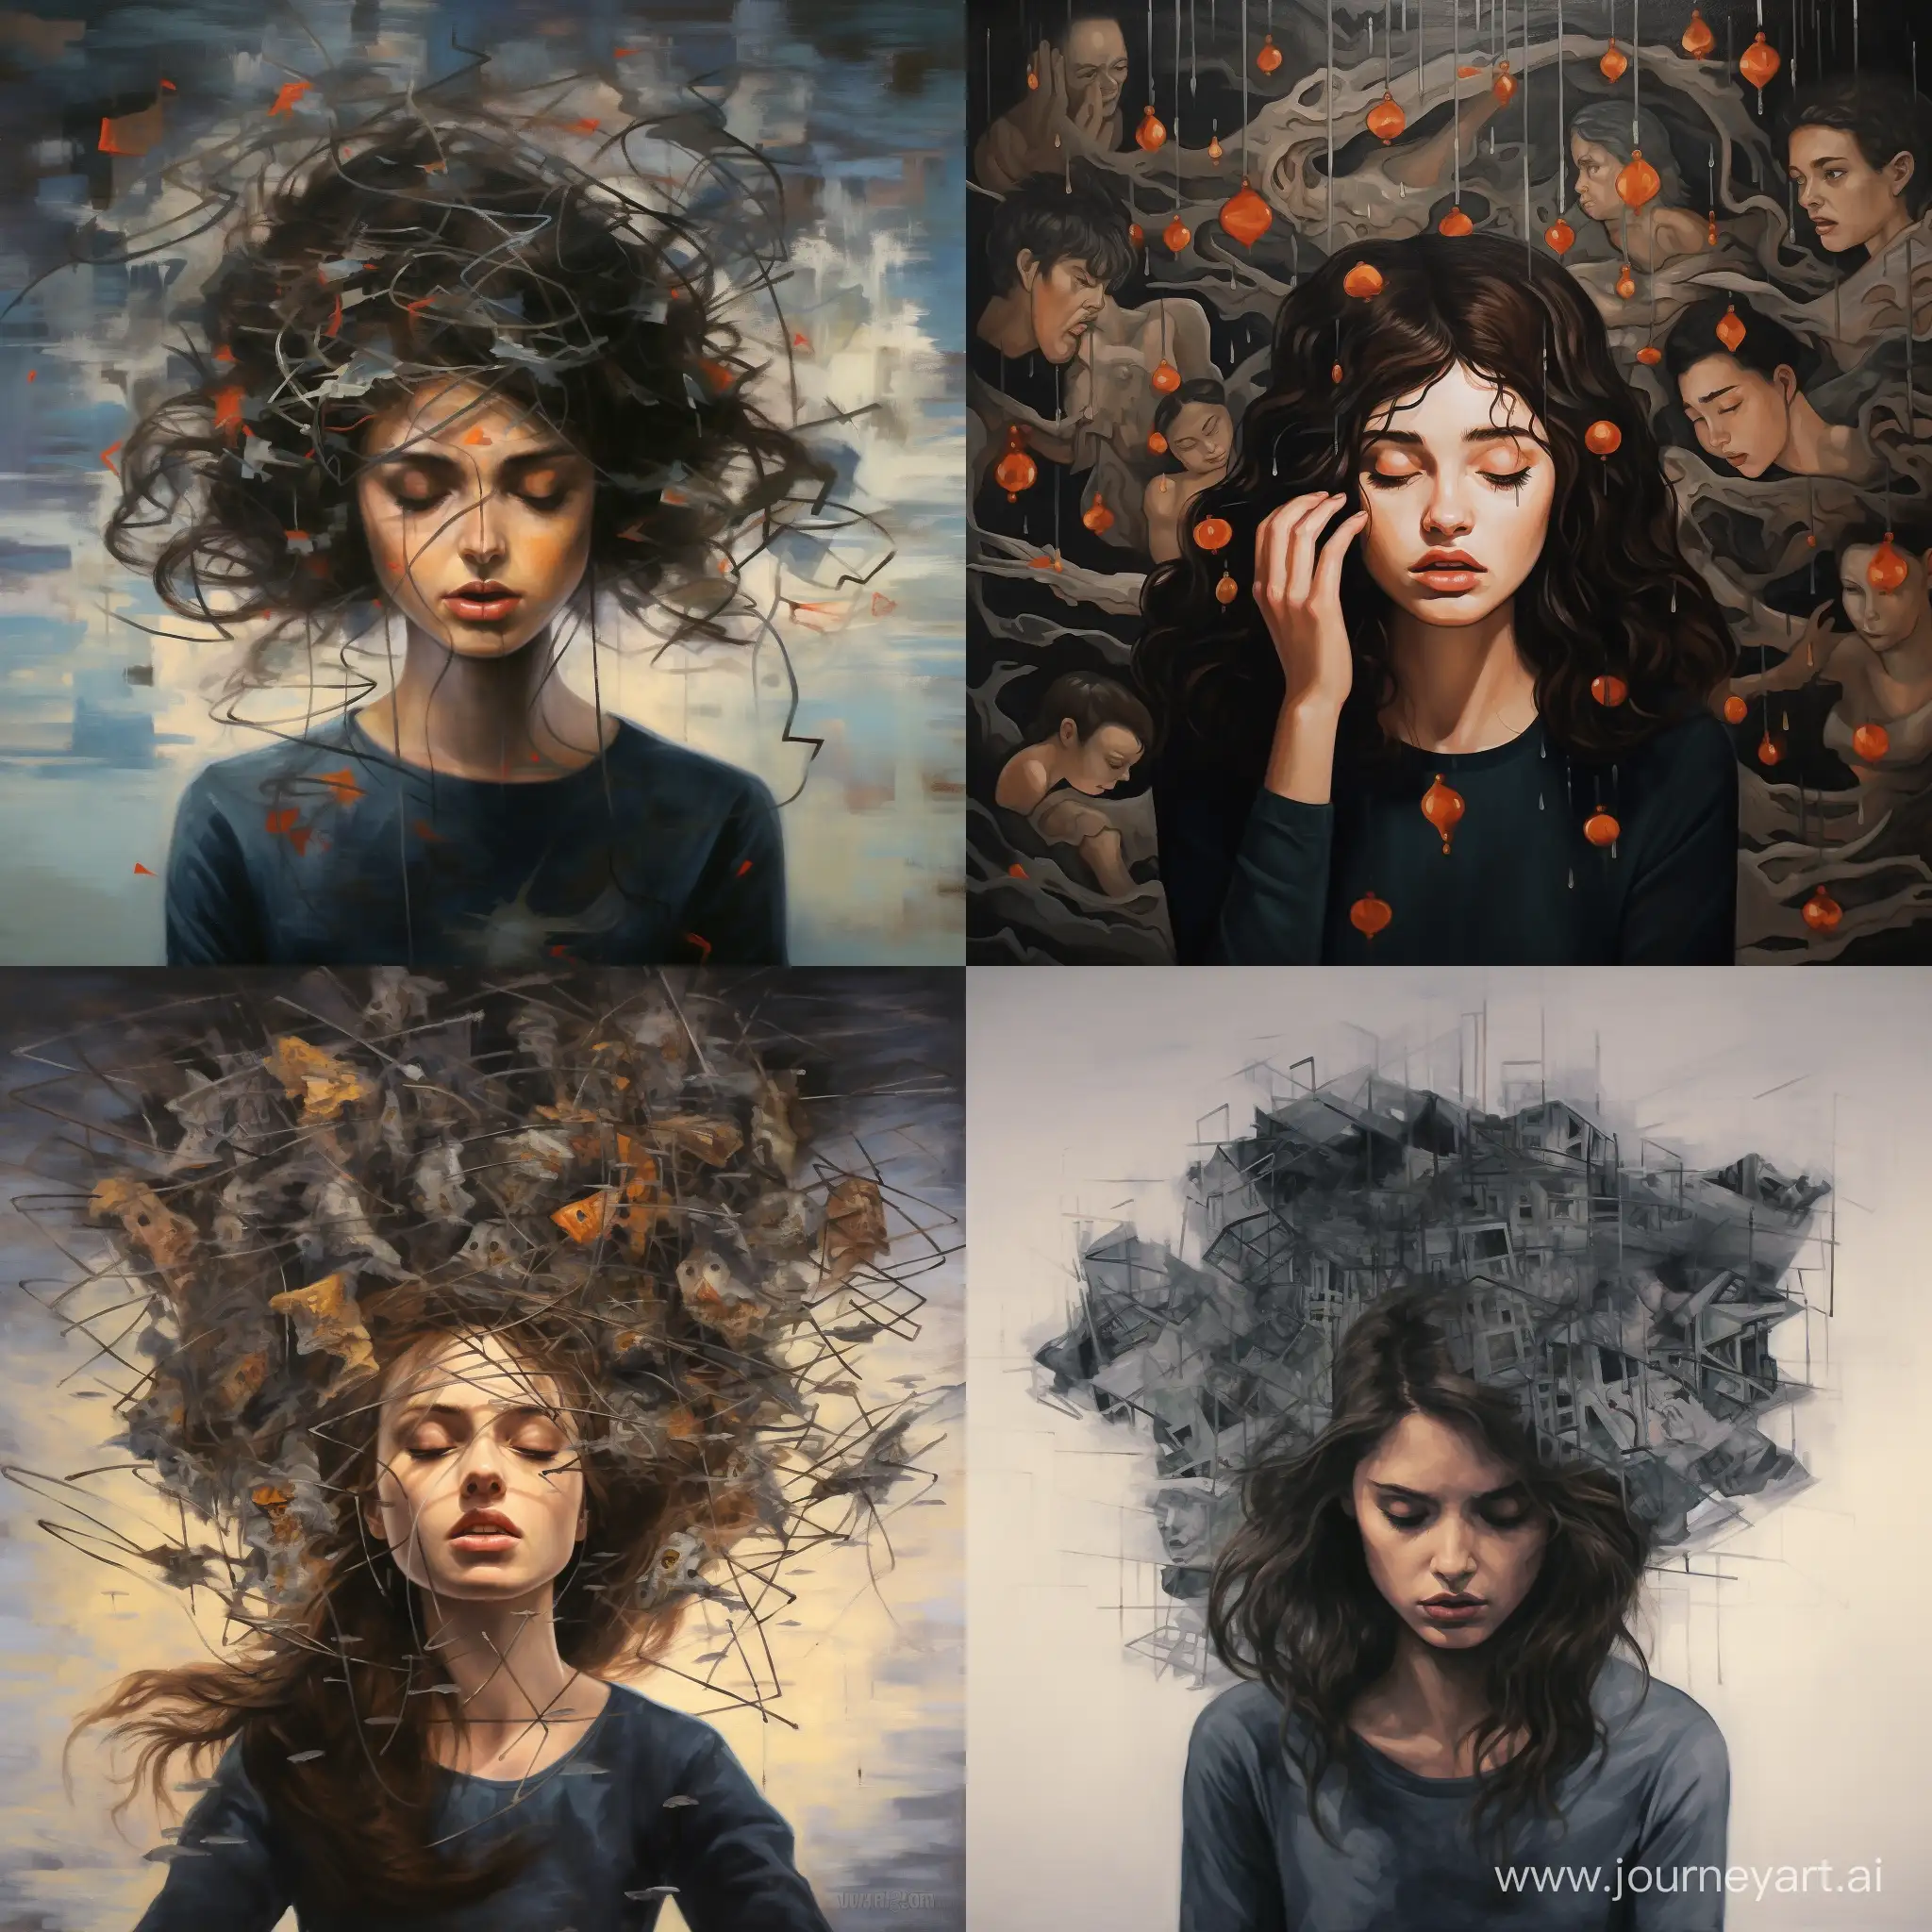 Cathartic-Release-of-Negative-Emotions-Expressive-11-Artwork